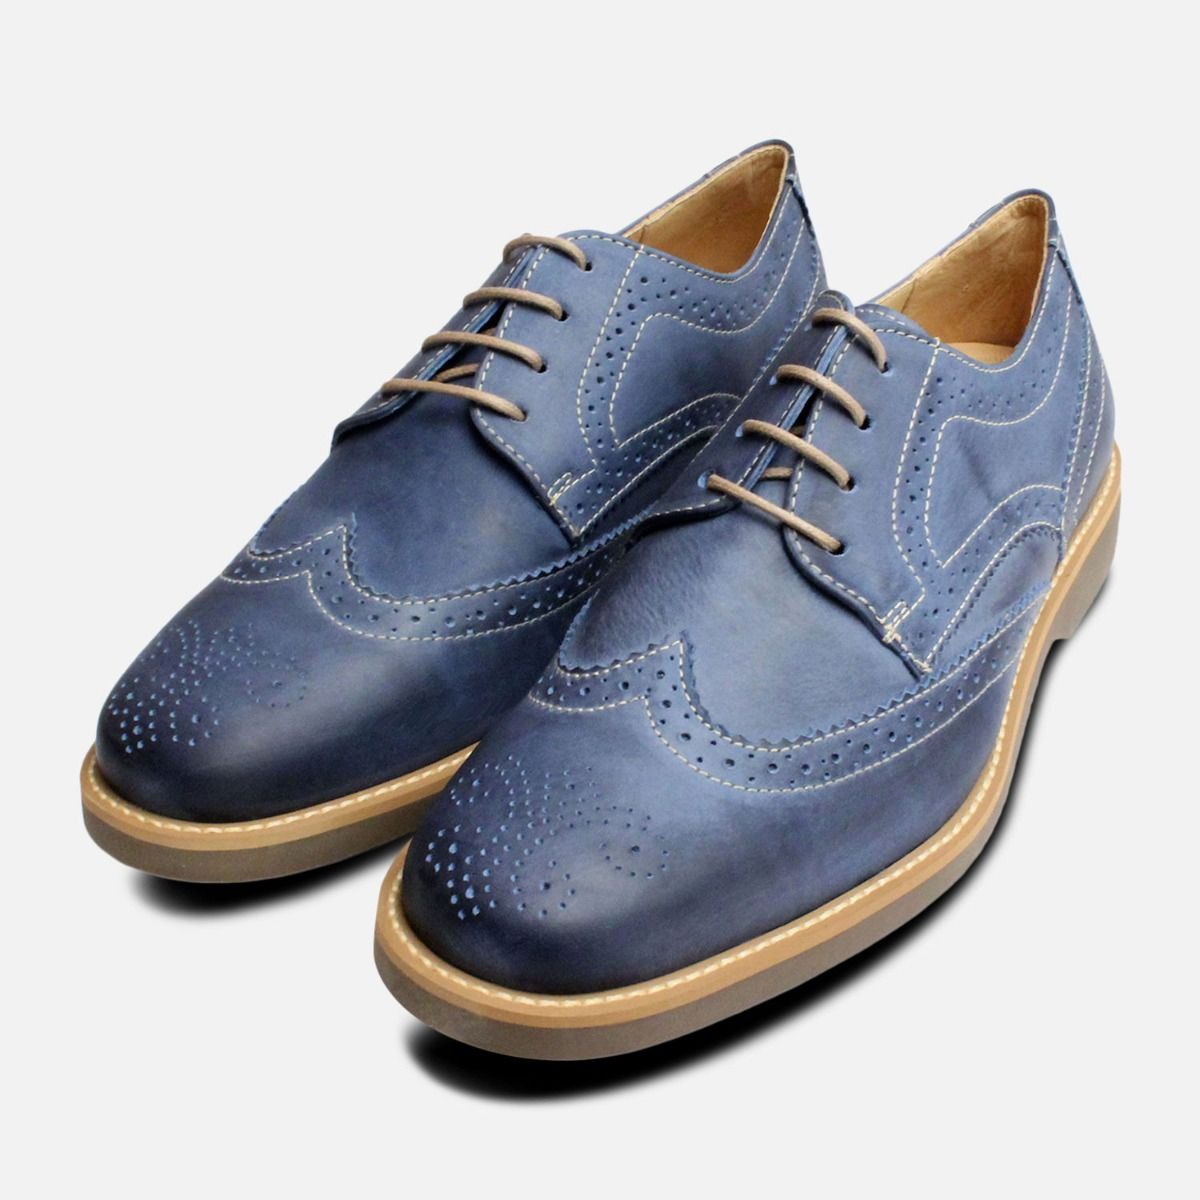 Oblong Bad faith Blaze Sky Blue Leather Mens Brogues by Anatomic Shoes